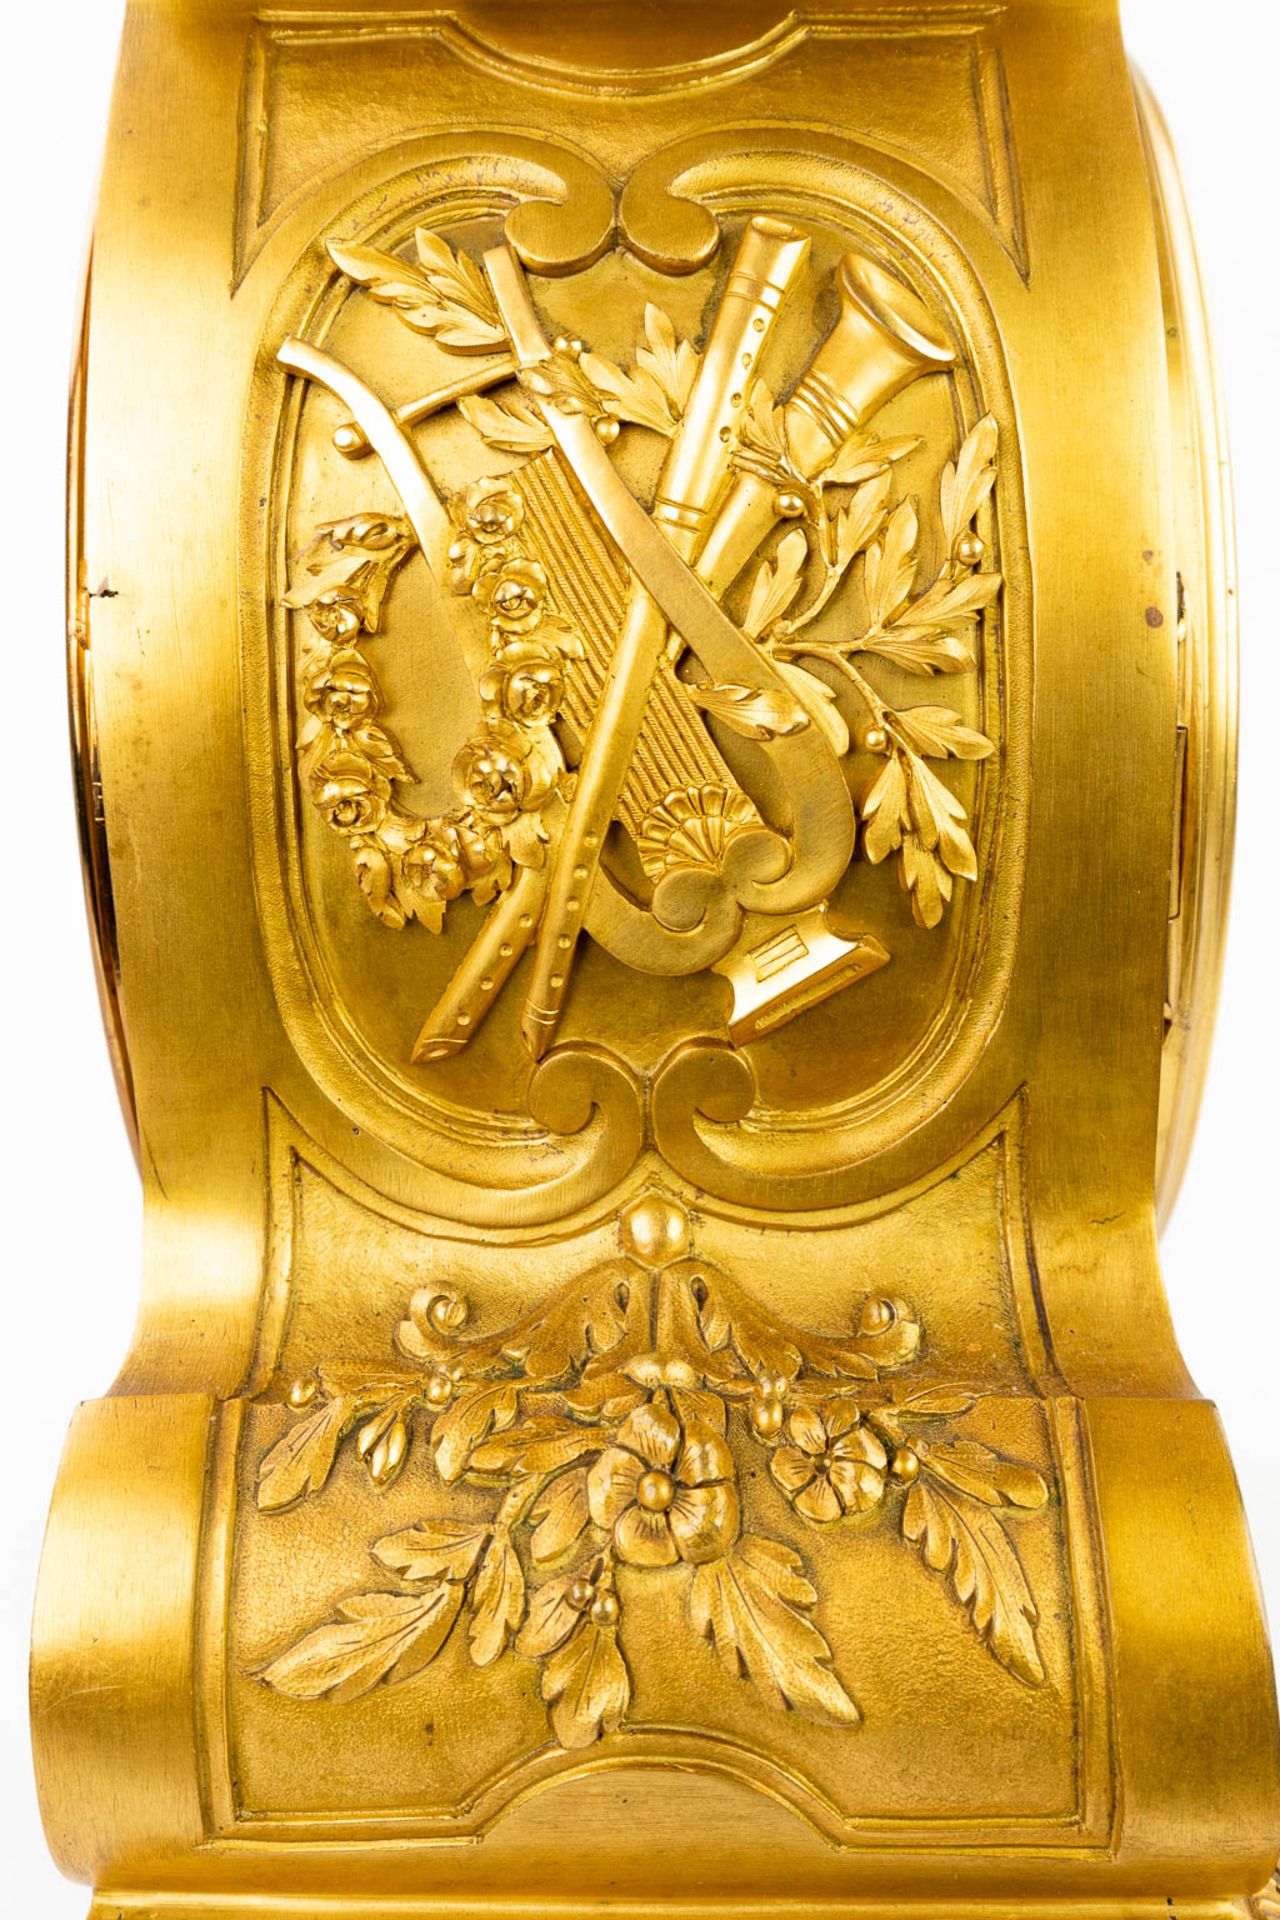 A large mantle clock 'Father Time' made of gilt bronze in Louis XVI style. (18 x 40 x 74cm) - Image 6 of 14